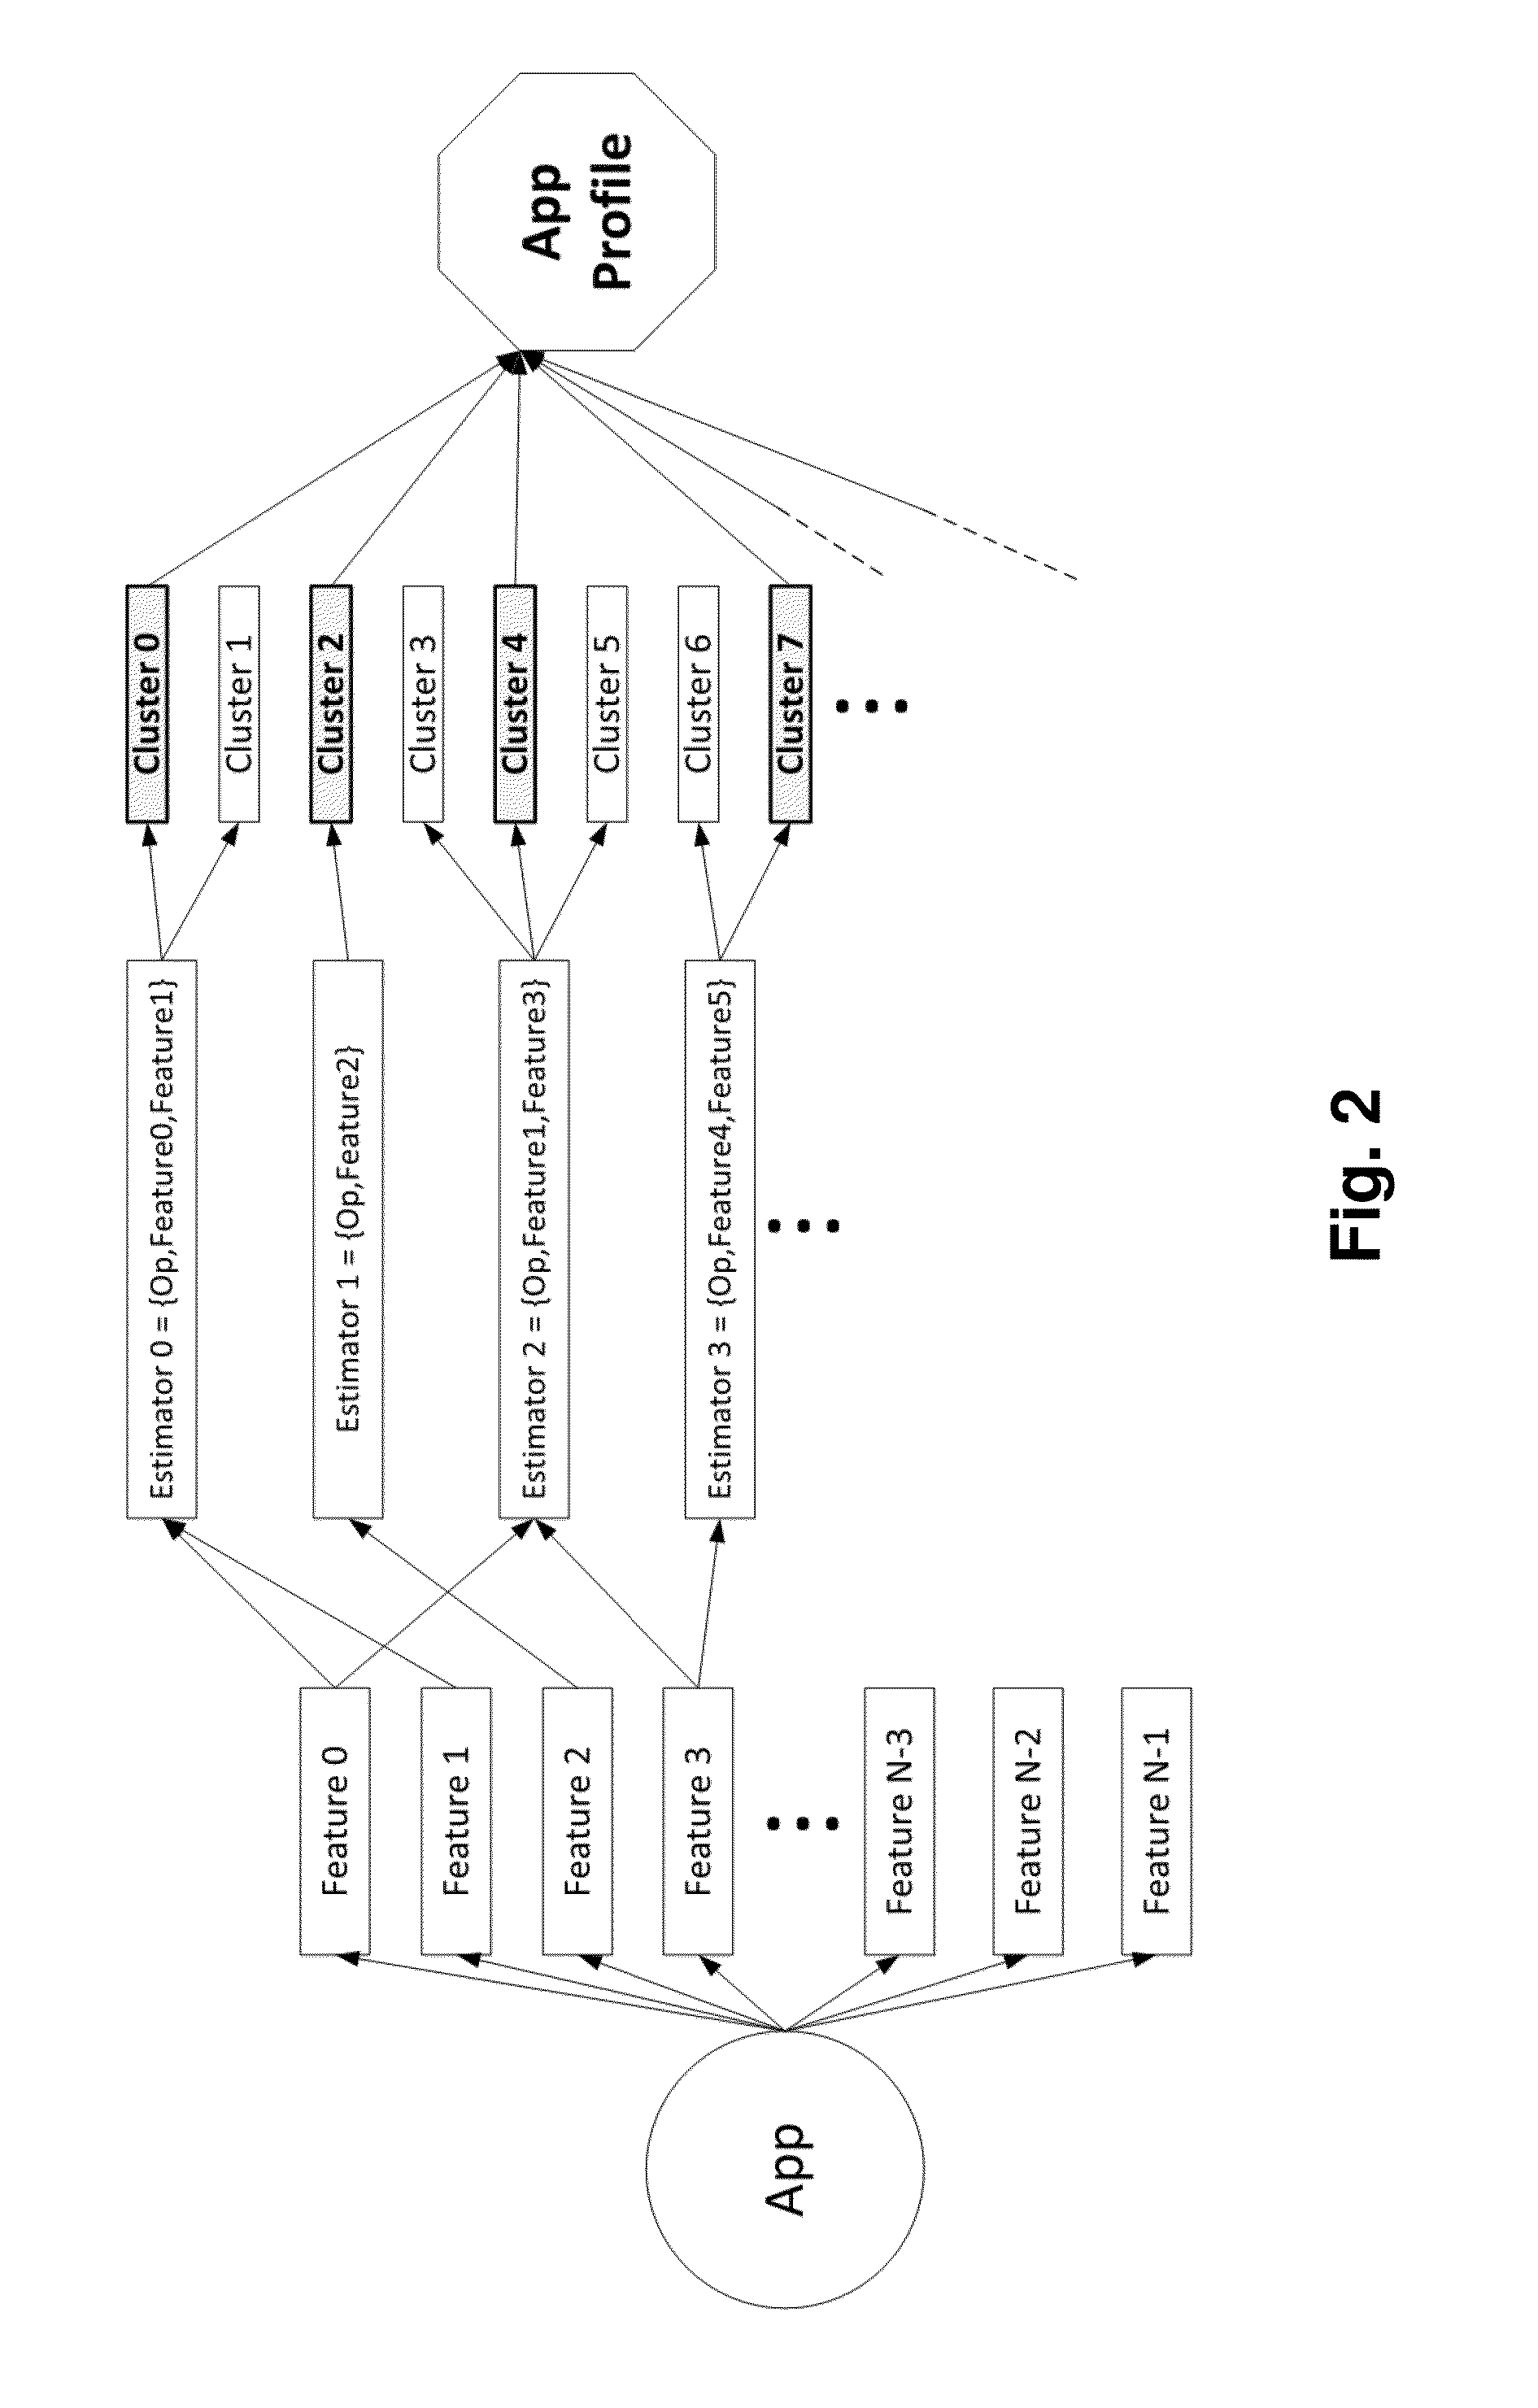 Computer implemented method for classifying mobile applications and computer programs thereof